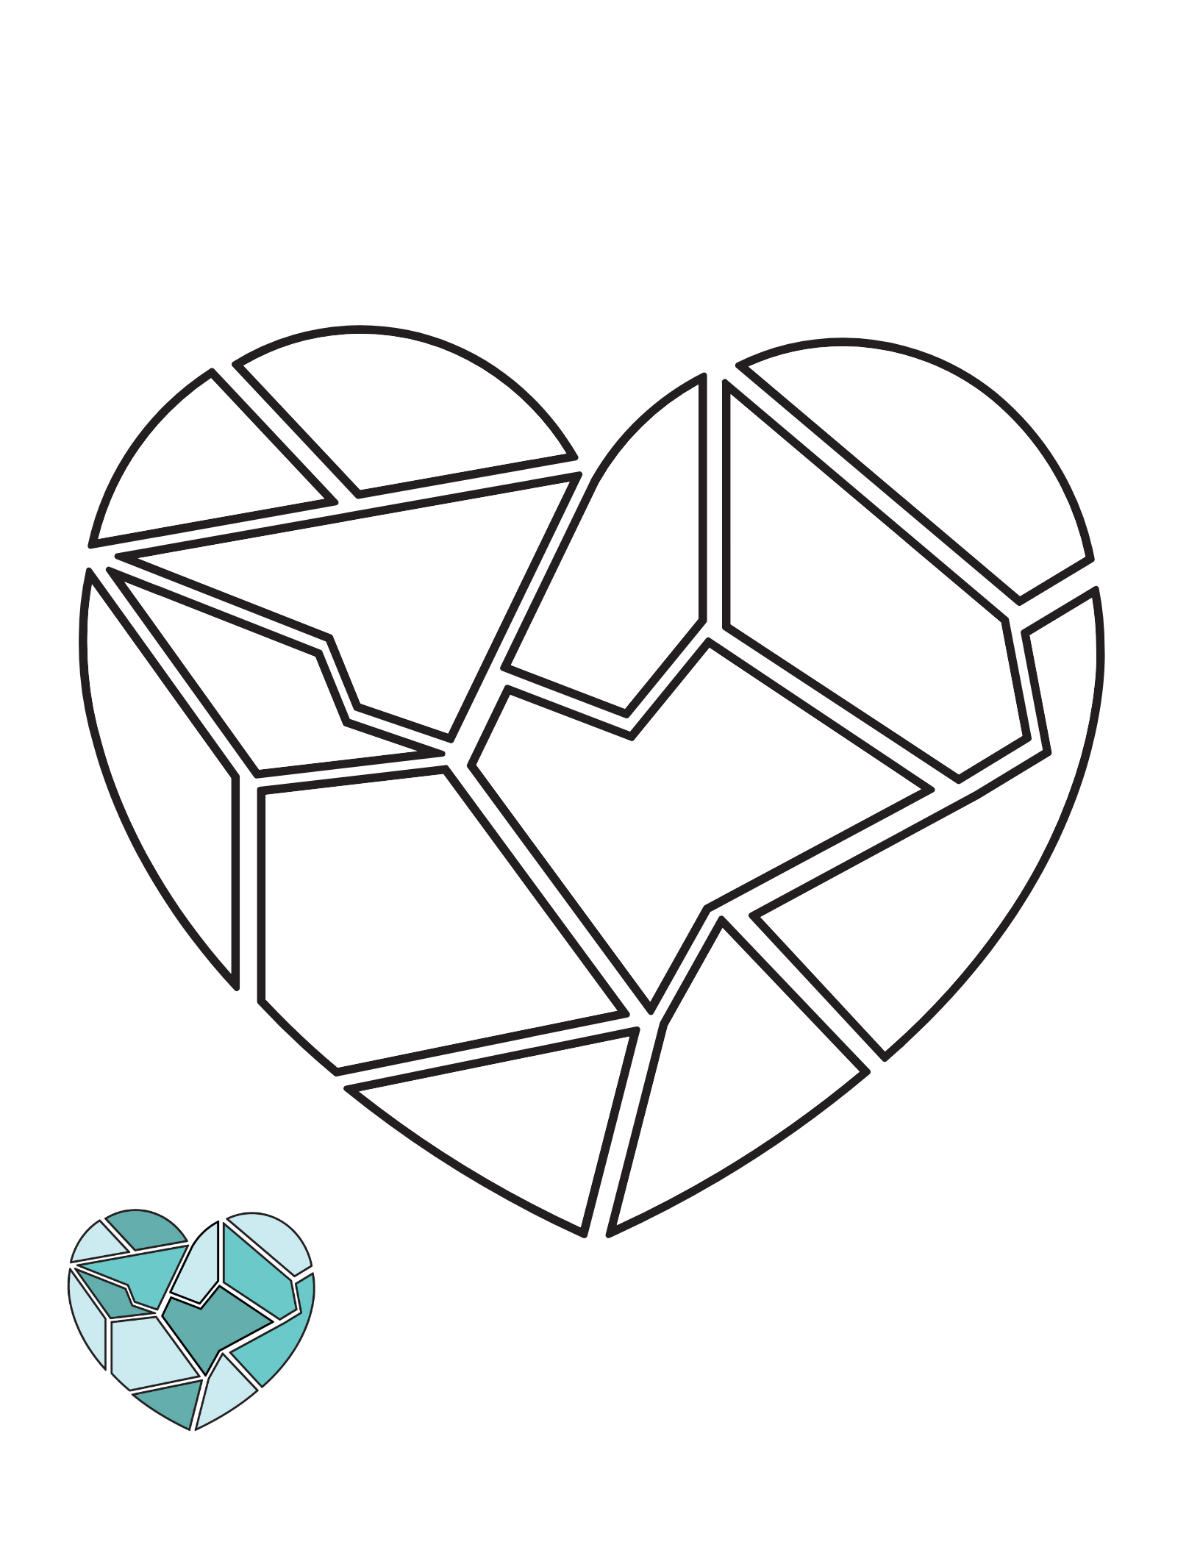 Broken Glass Heart Coloring Page Template